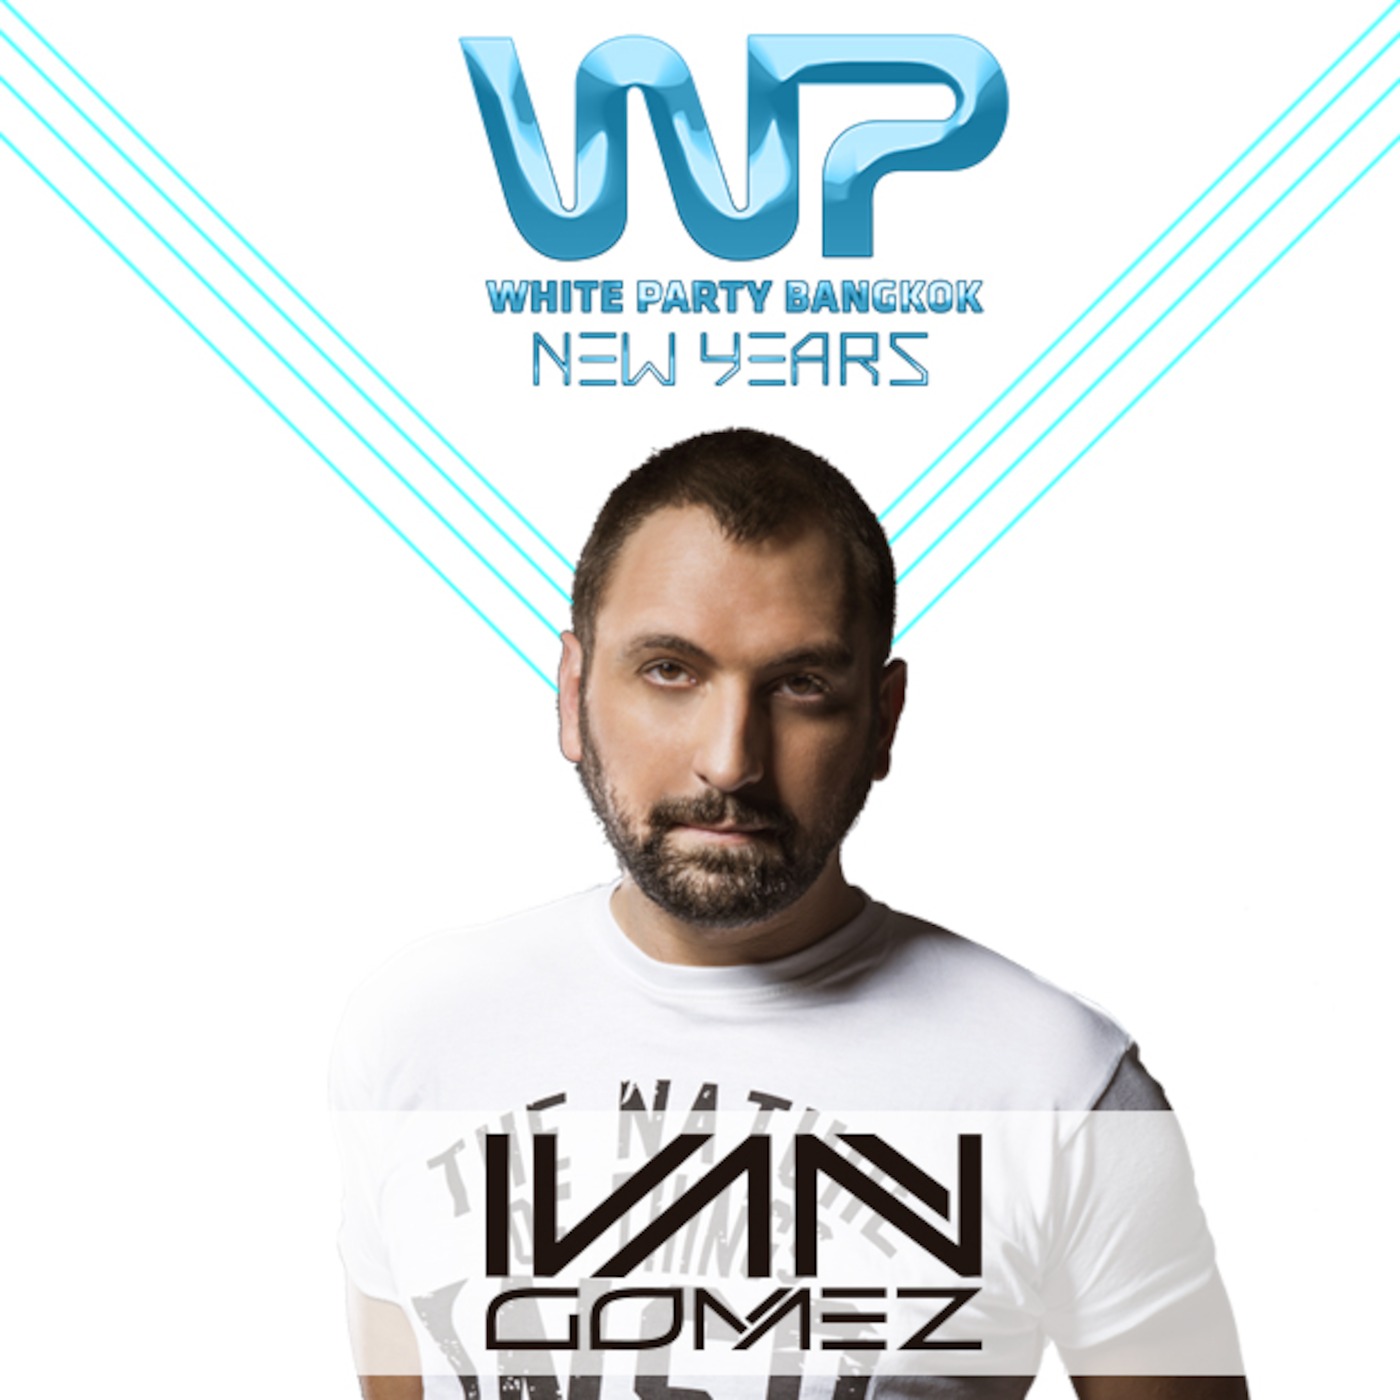 Ivan Gomez Podcast #6 WHITE PARTY BANGKOK  NEW YEARS 2016 (Official Promo Podcast)